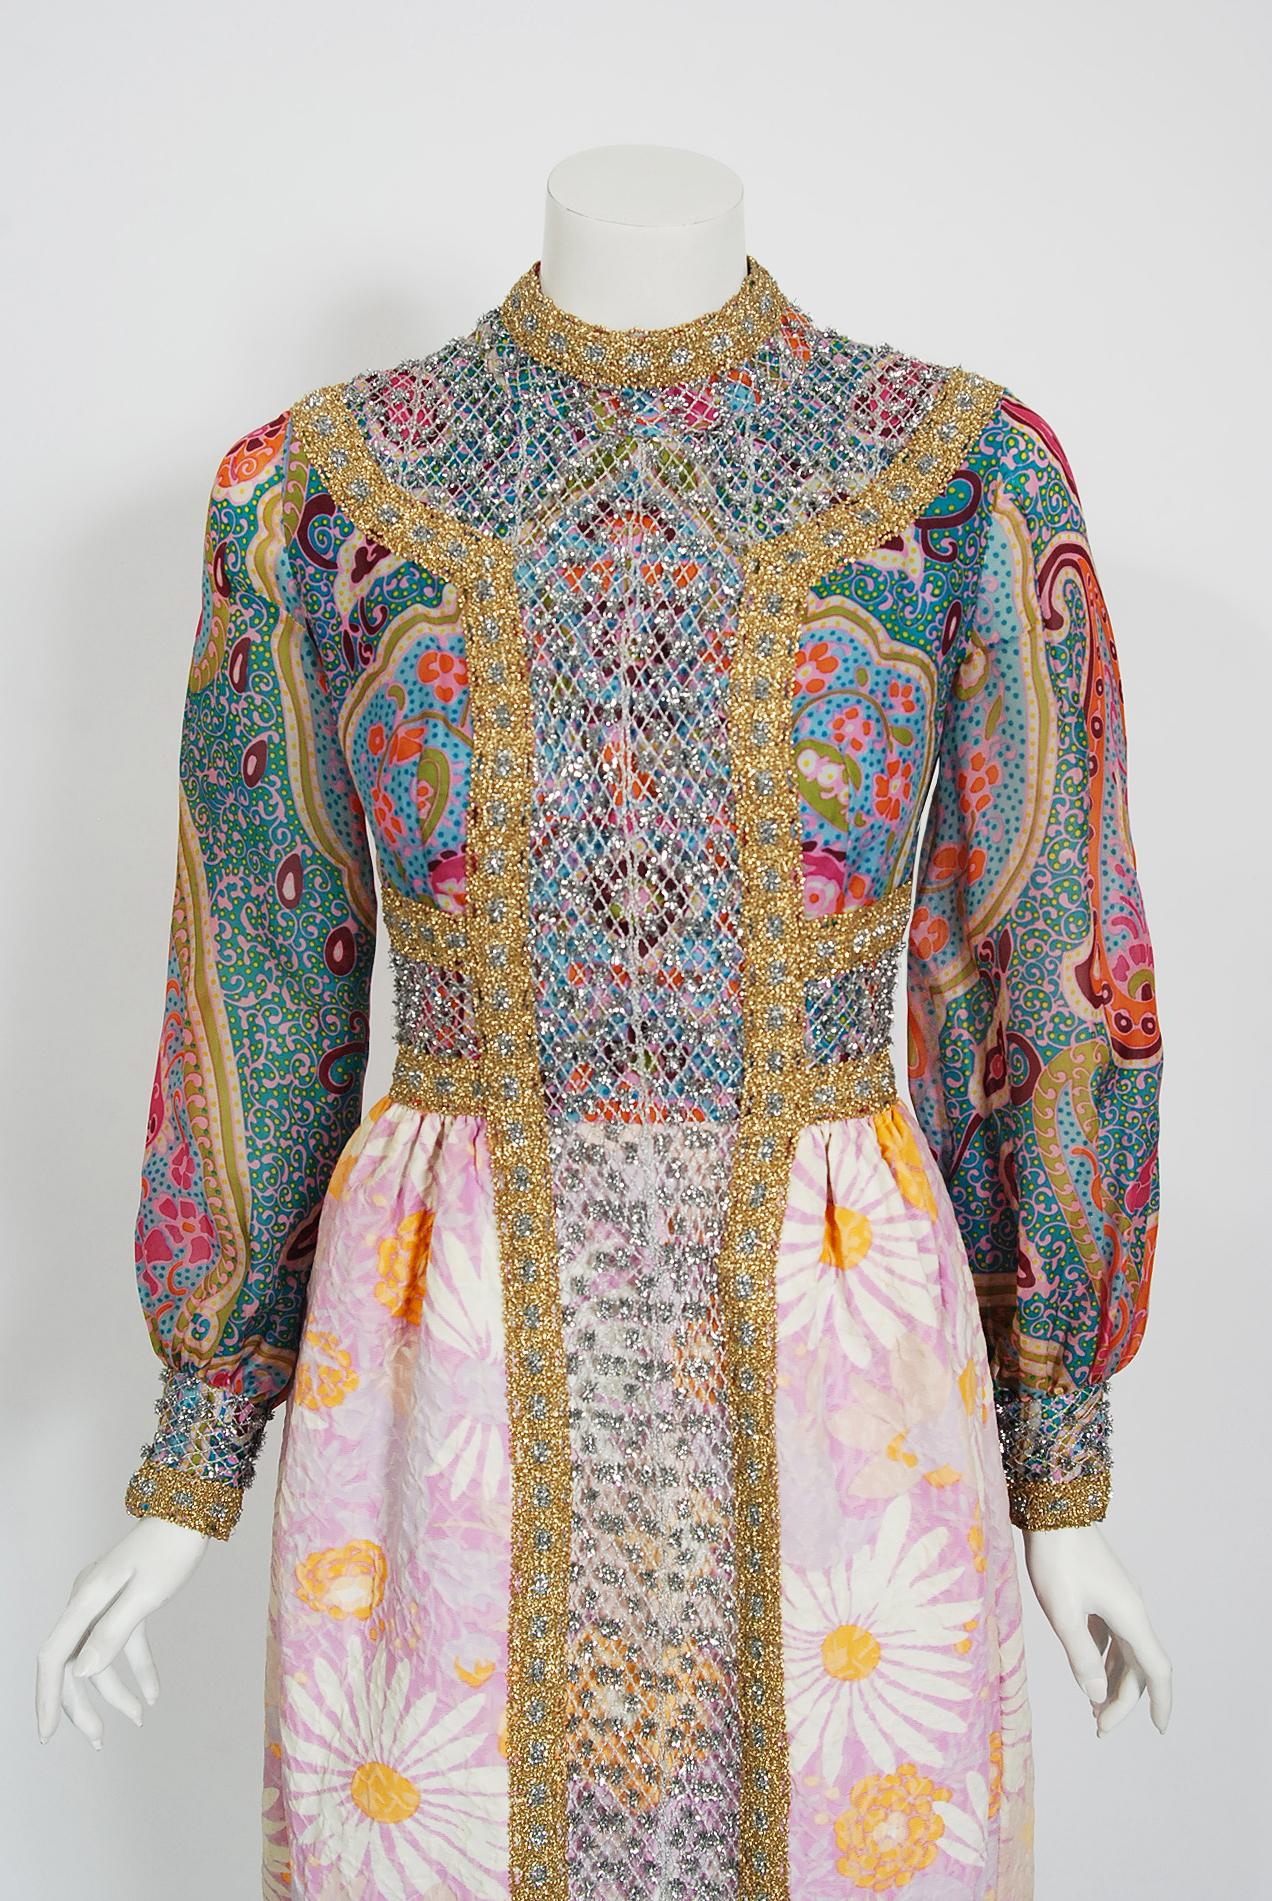 Stunning Ronald Amey couture colorful psychedelic print silk and textured waffle-cotton dress, dating back to the early 1970's. I love the playful mix of textiles while keeping a chic minimalist approach in design. The sparkling metallic tinsel-knit